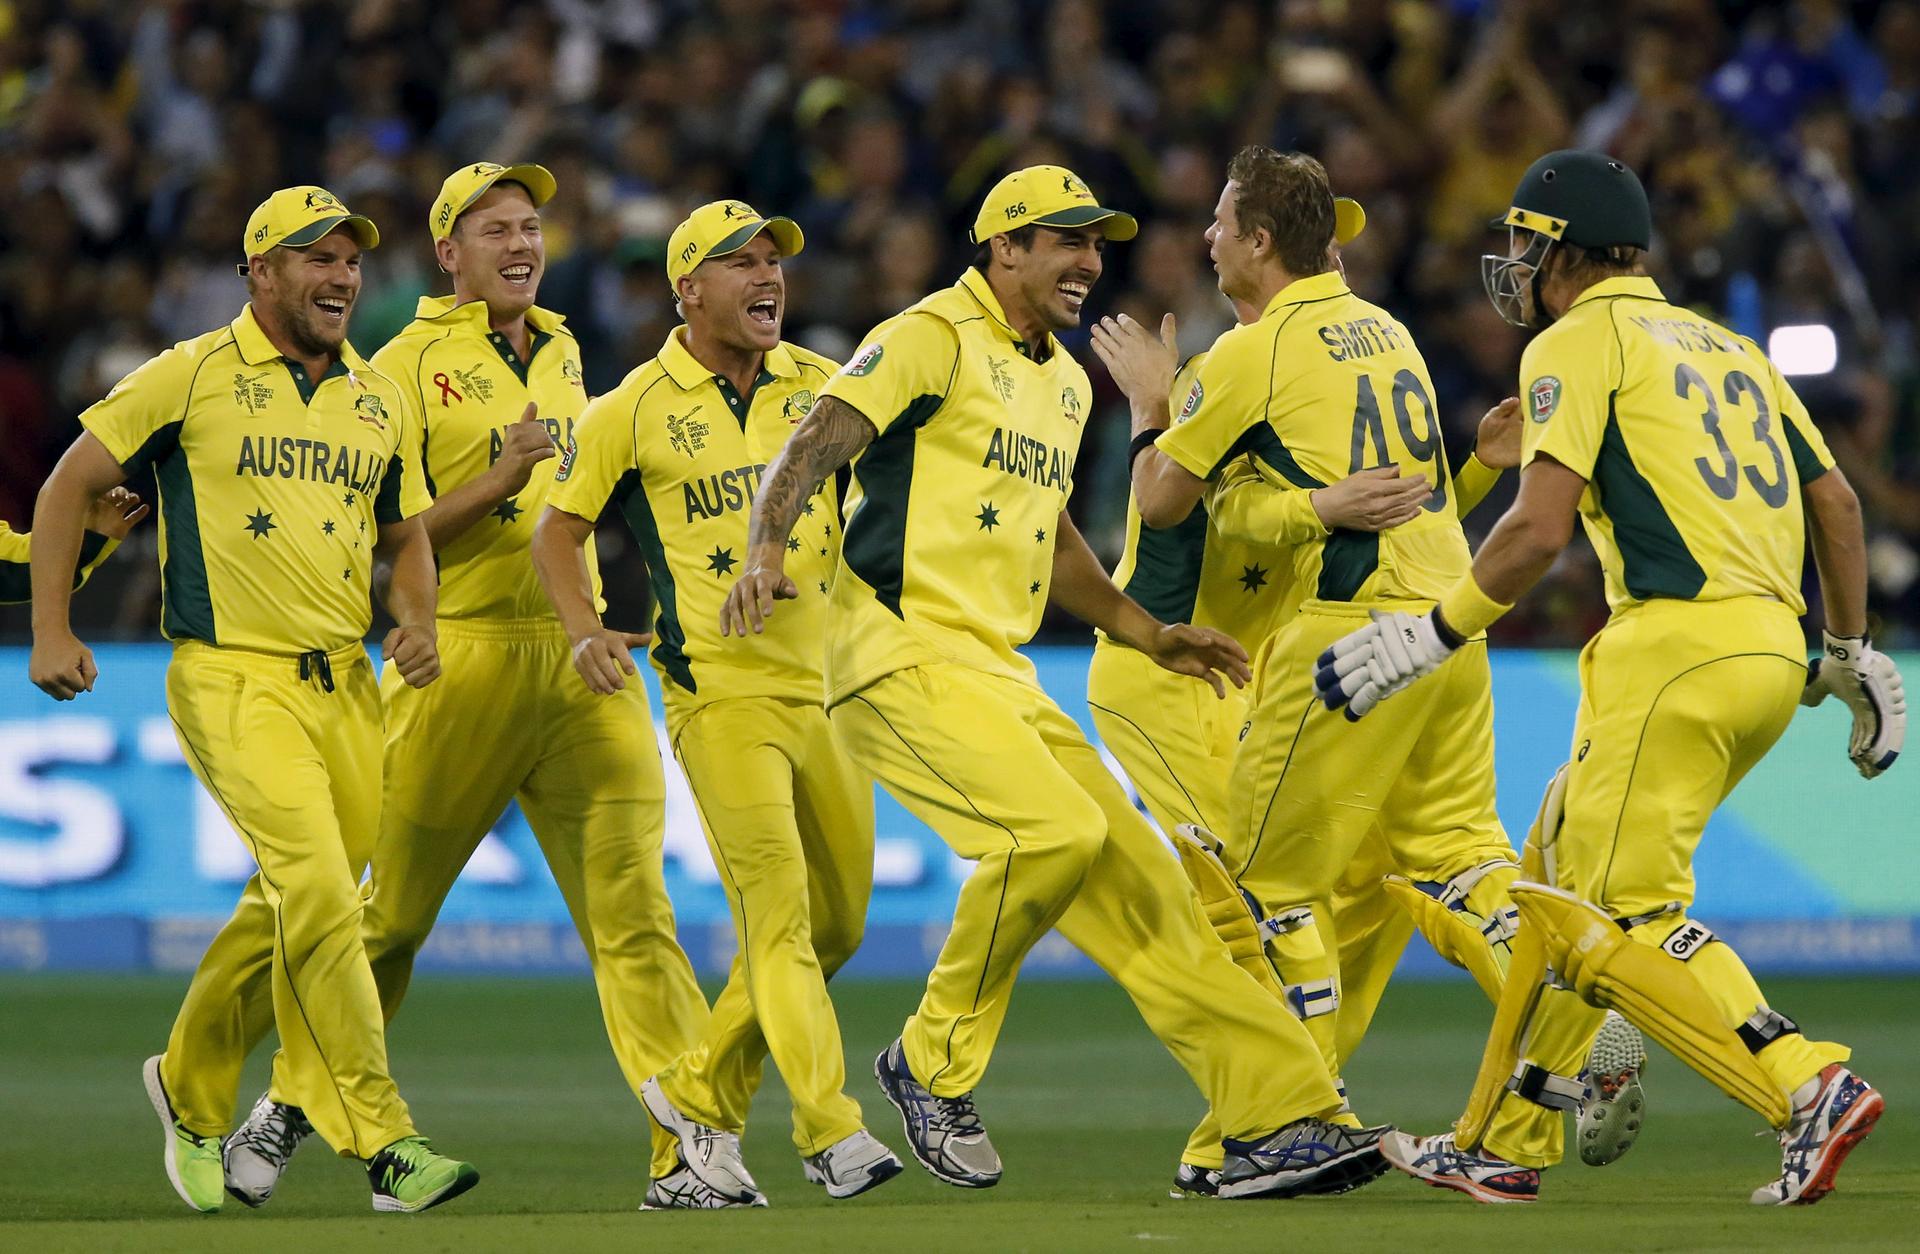 The smiles say it all as Australian players celebrate after defeating New Zealand in their Cricket World Cup final match at the Melbourne Cricket Ground in front of a record crowd. Photos: Reuters